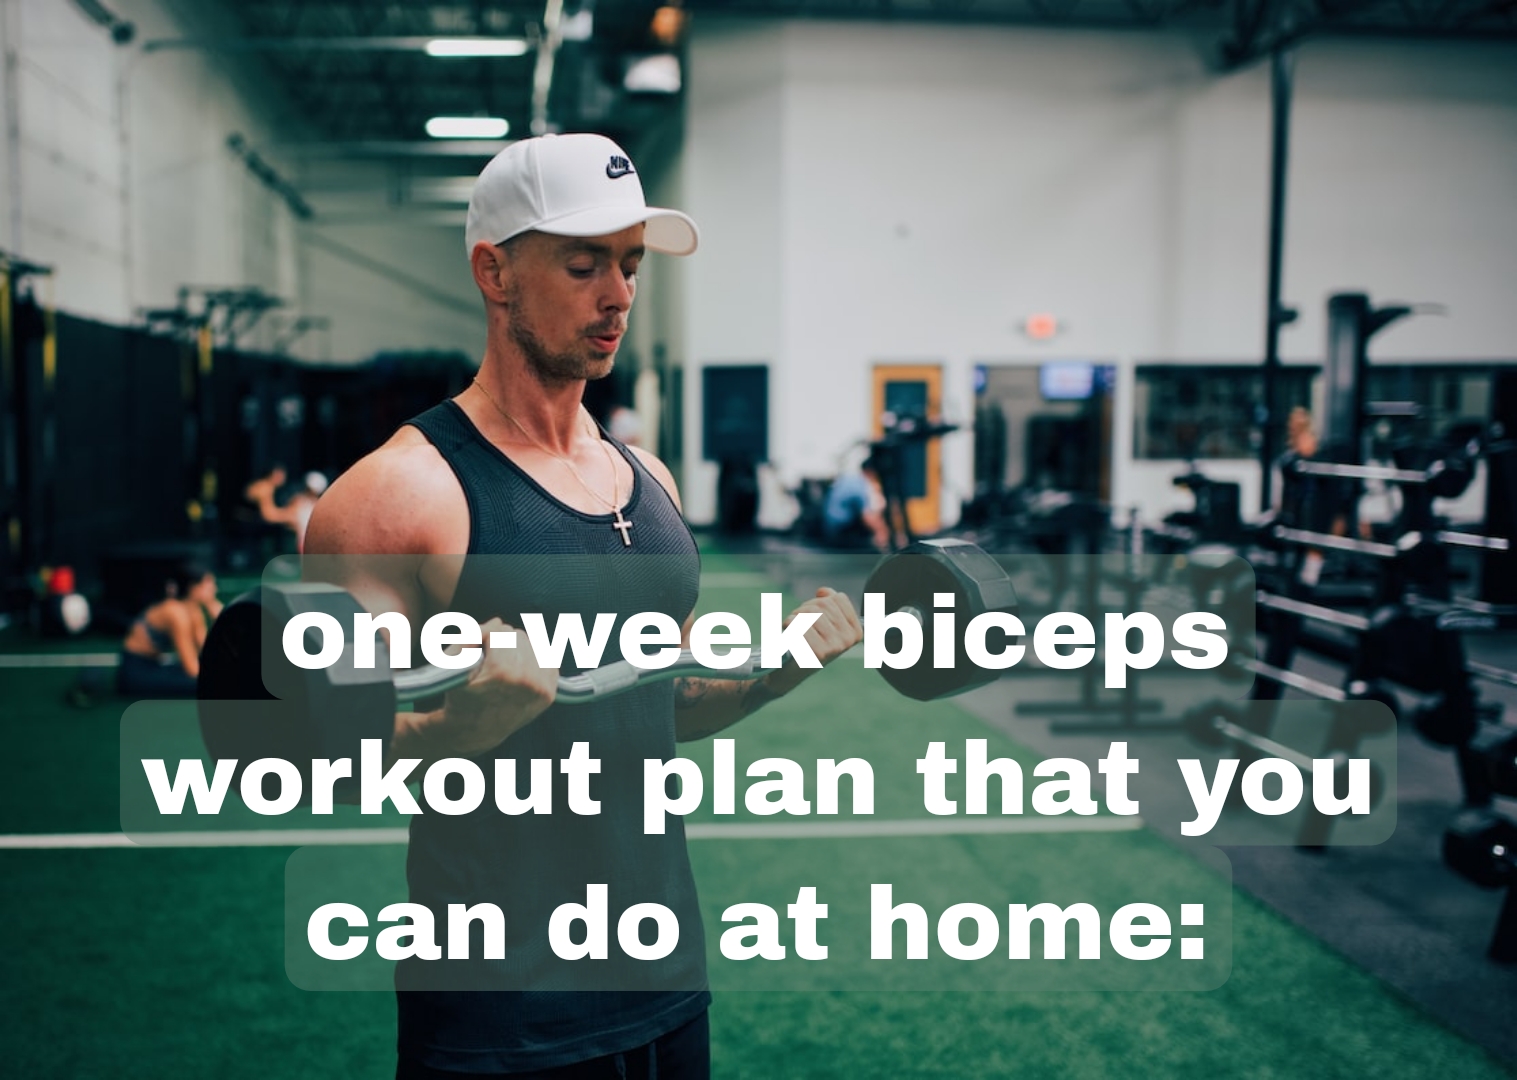 one-week biceps workout plan that you can do at home: